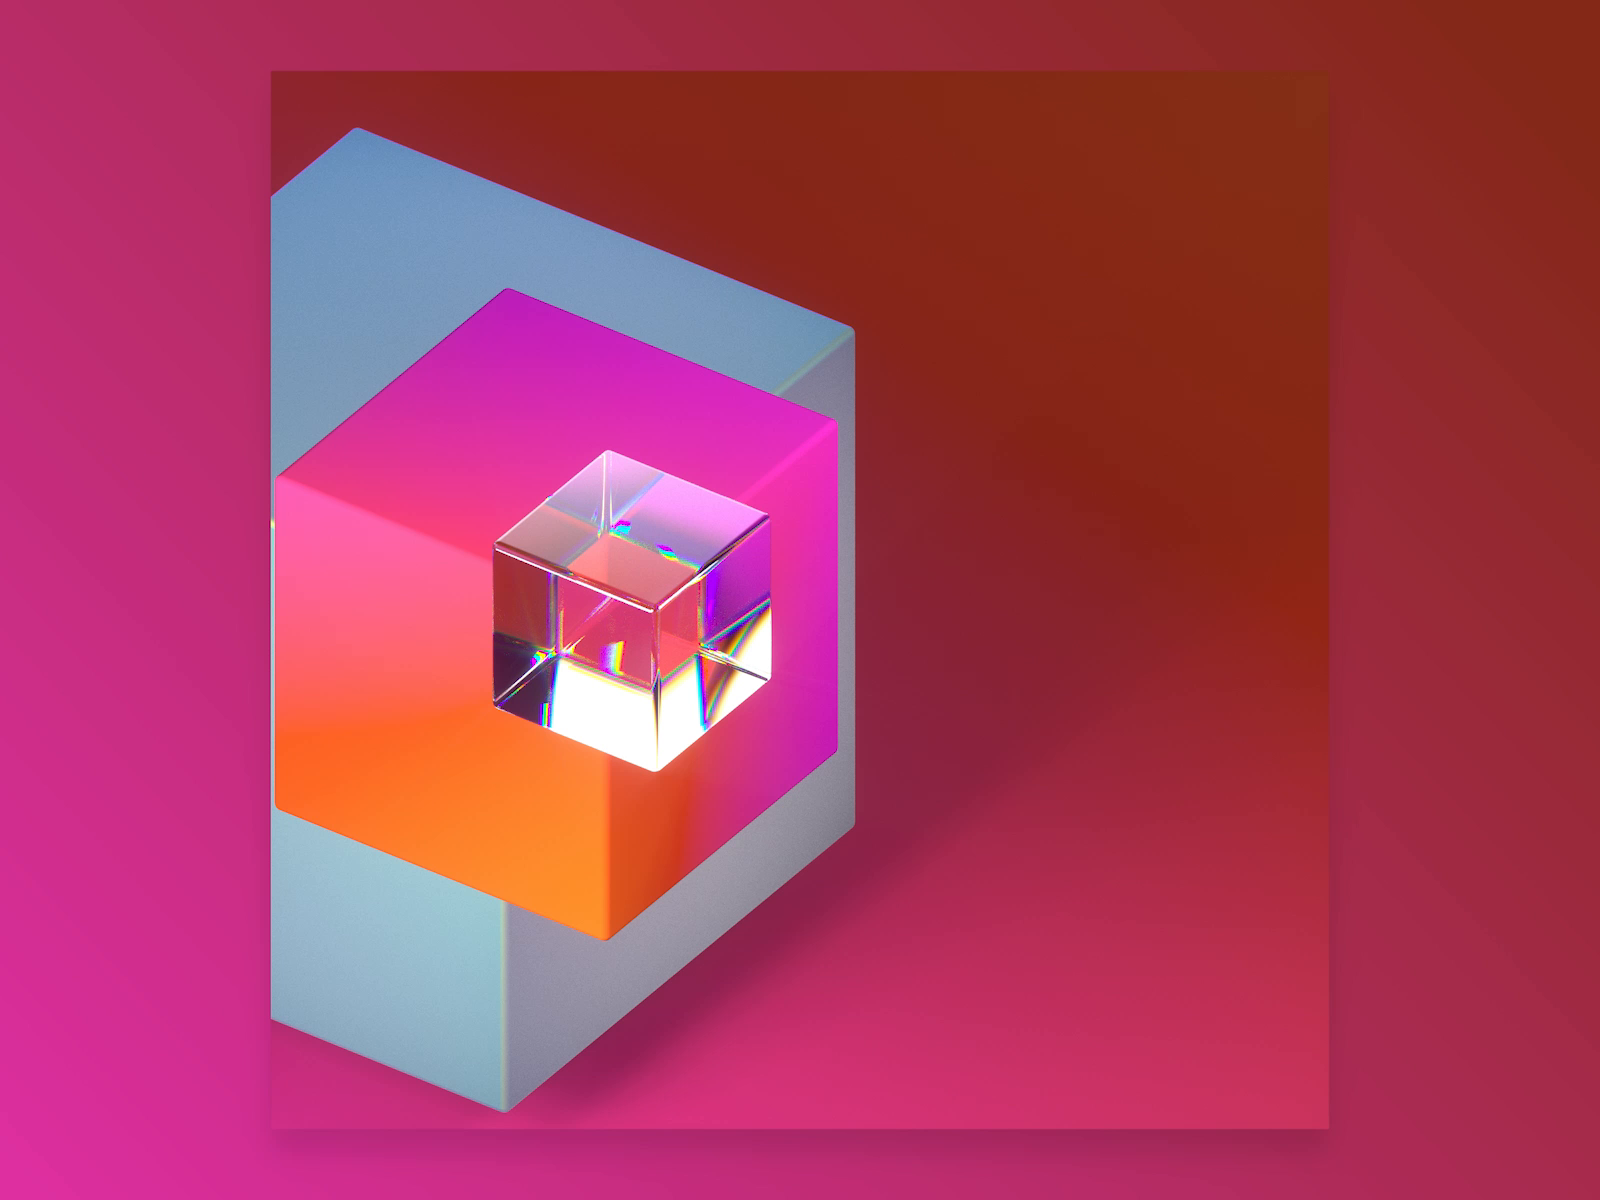 Isometric Boxes by Damian Kidd on Dribbble